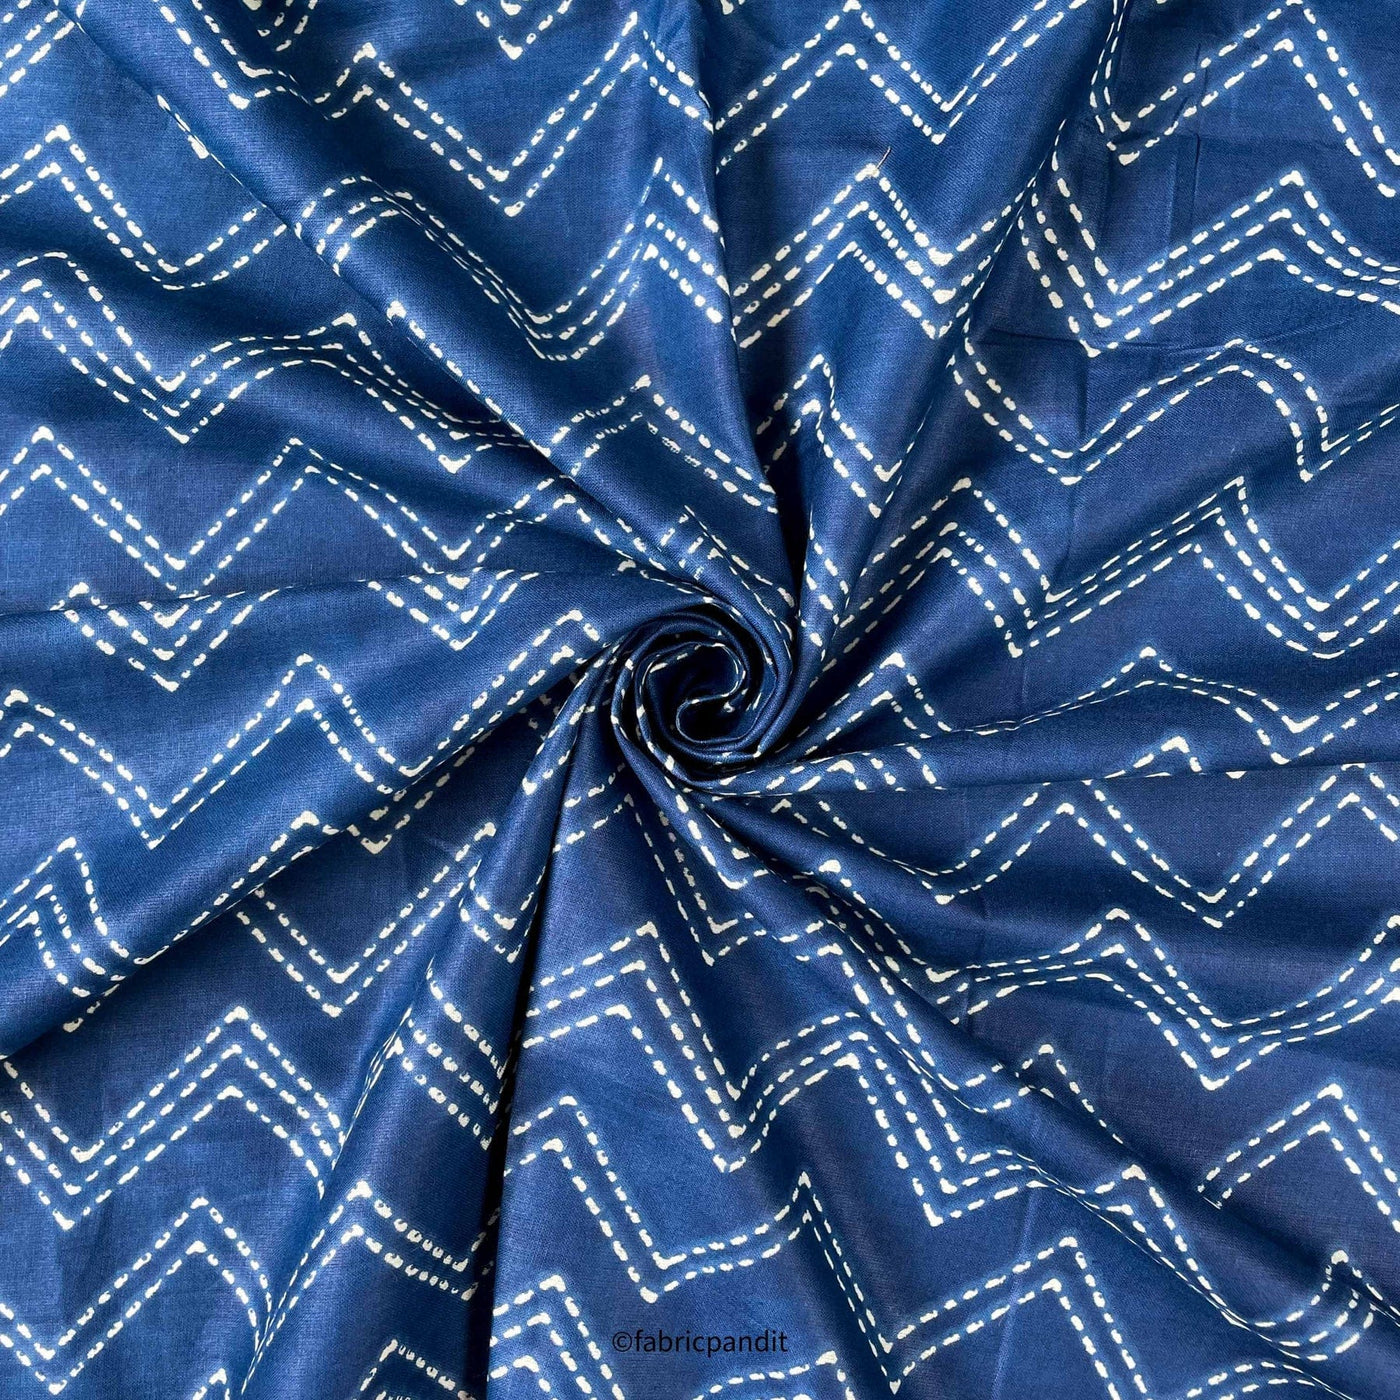 Fabric Pandit Fabric Navy Blue & White Zig-Zag Batik Natural Dyed Hand Block Printed Pure Cotton Fabric (Width 42 inches)